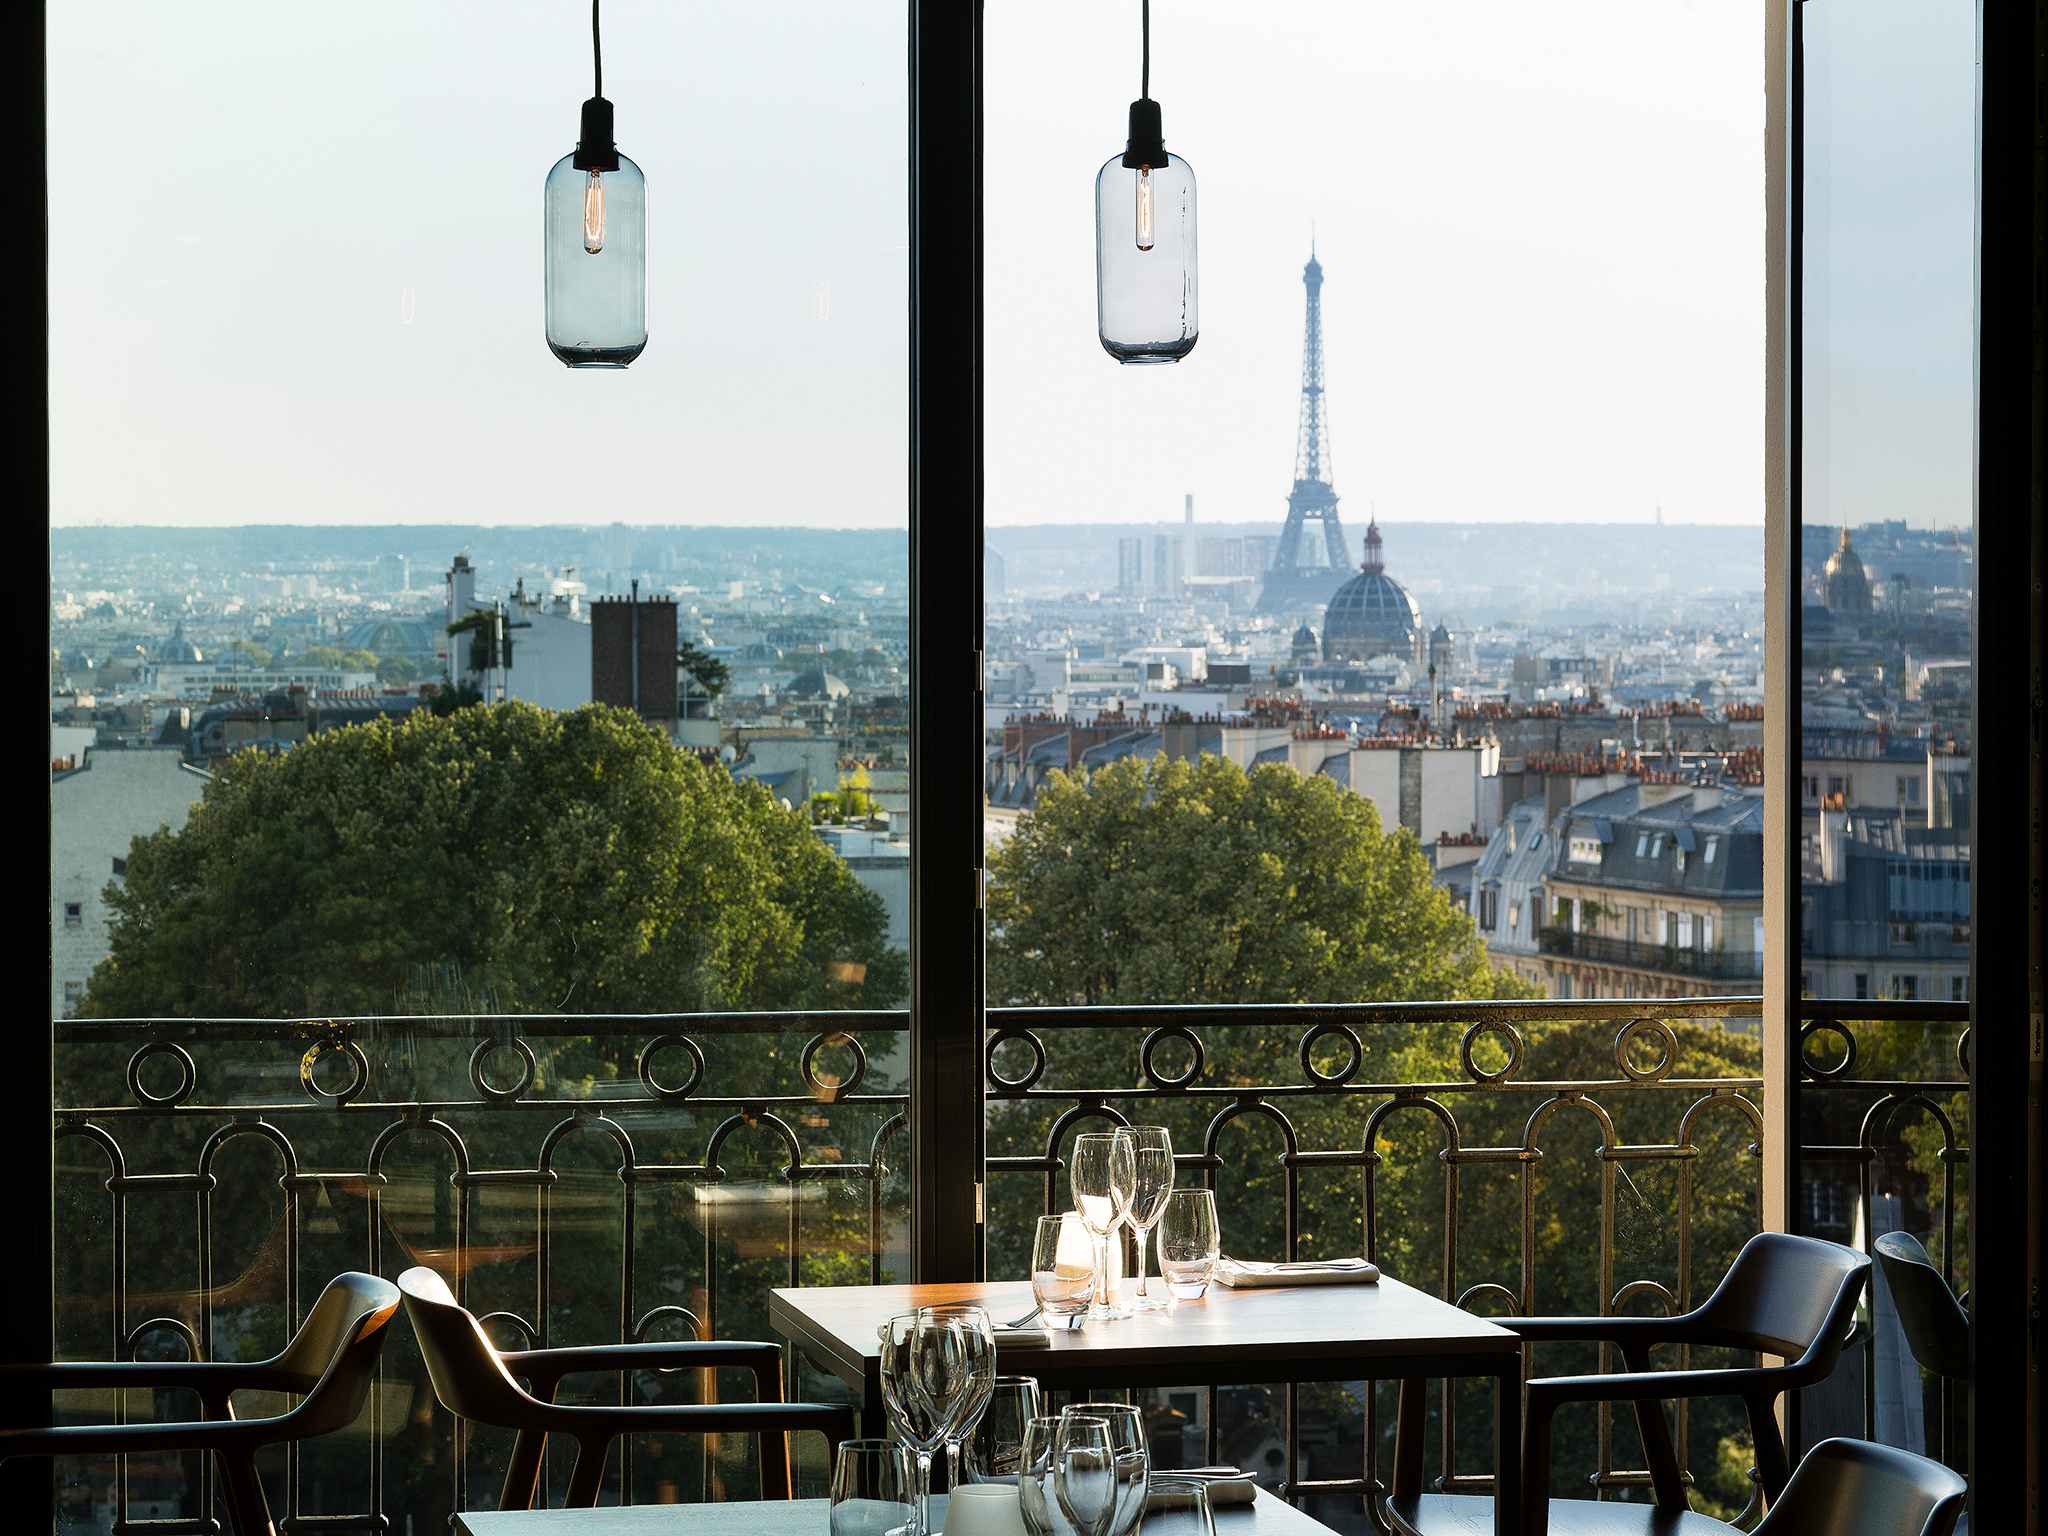 The hotel’s rooftop restaurant has spectacular views